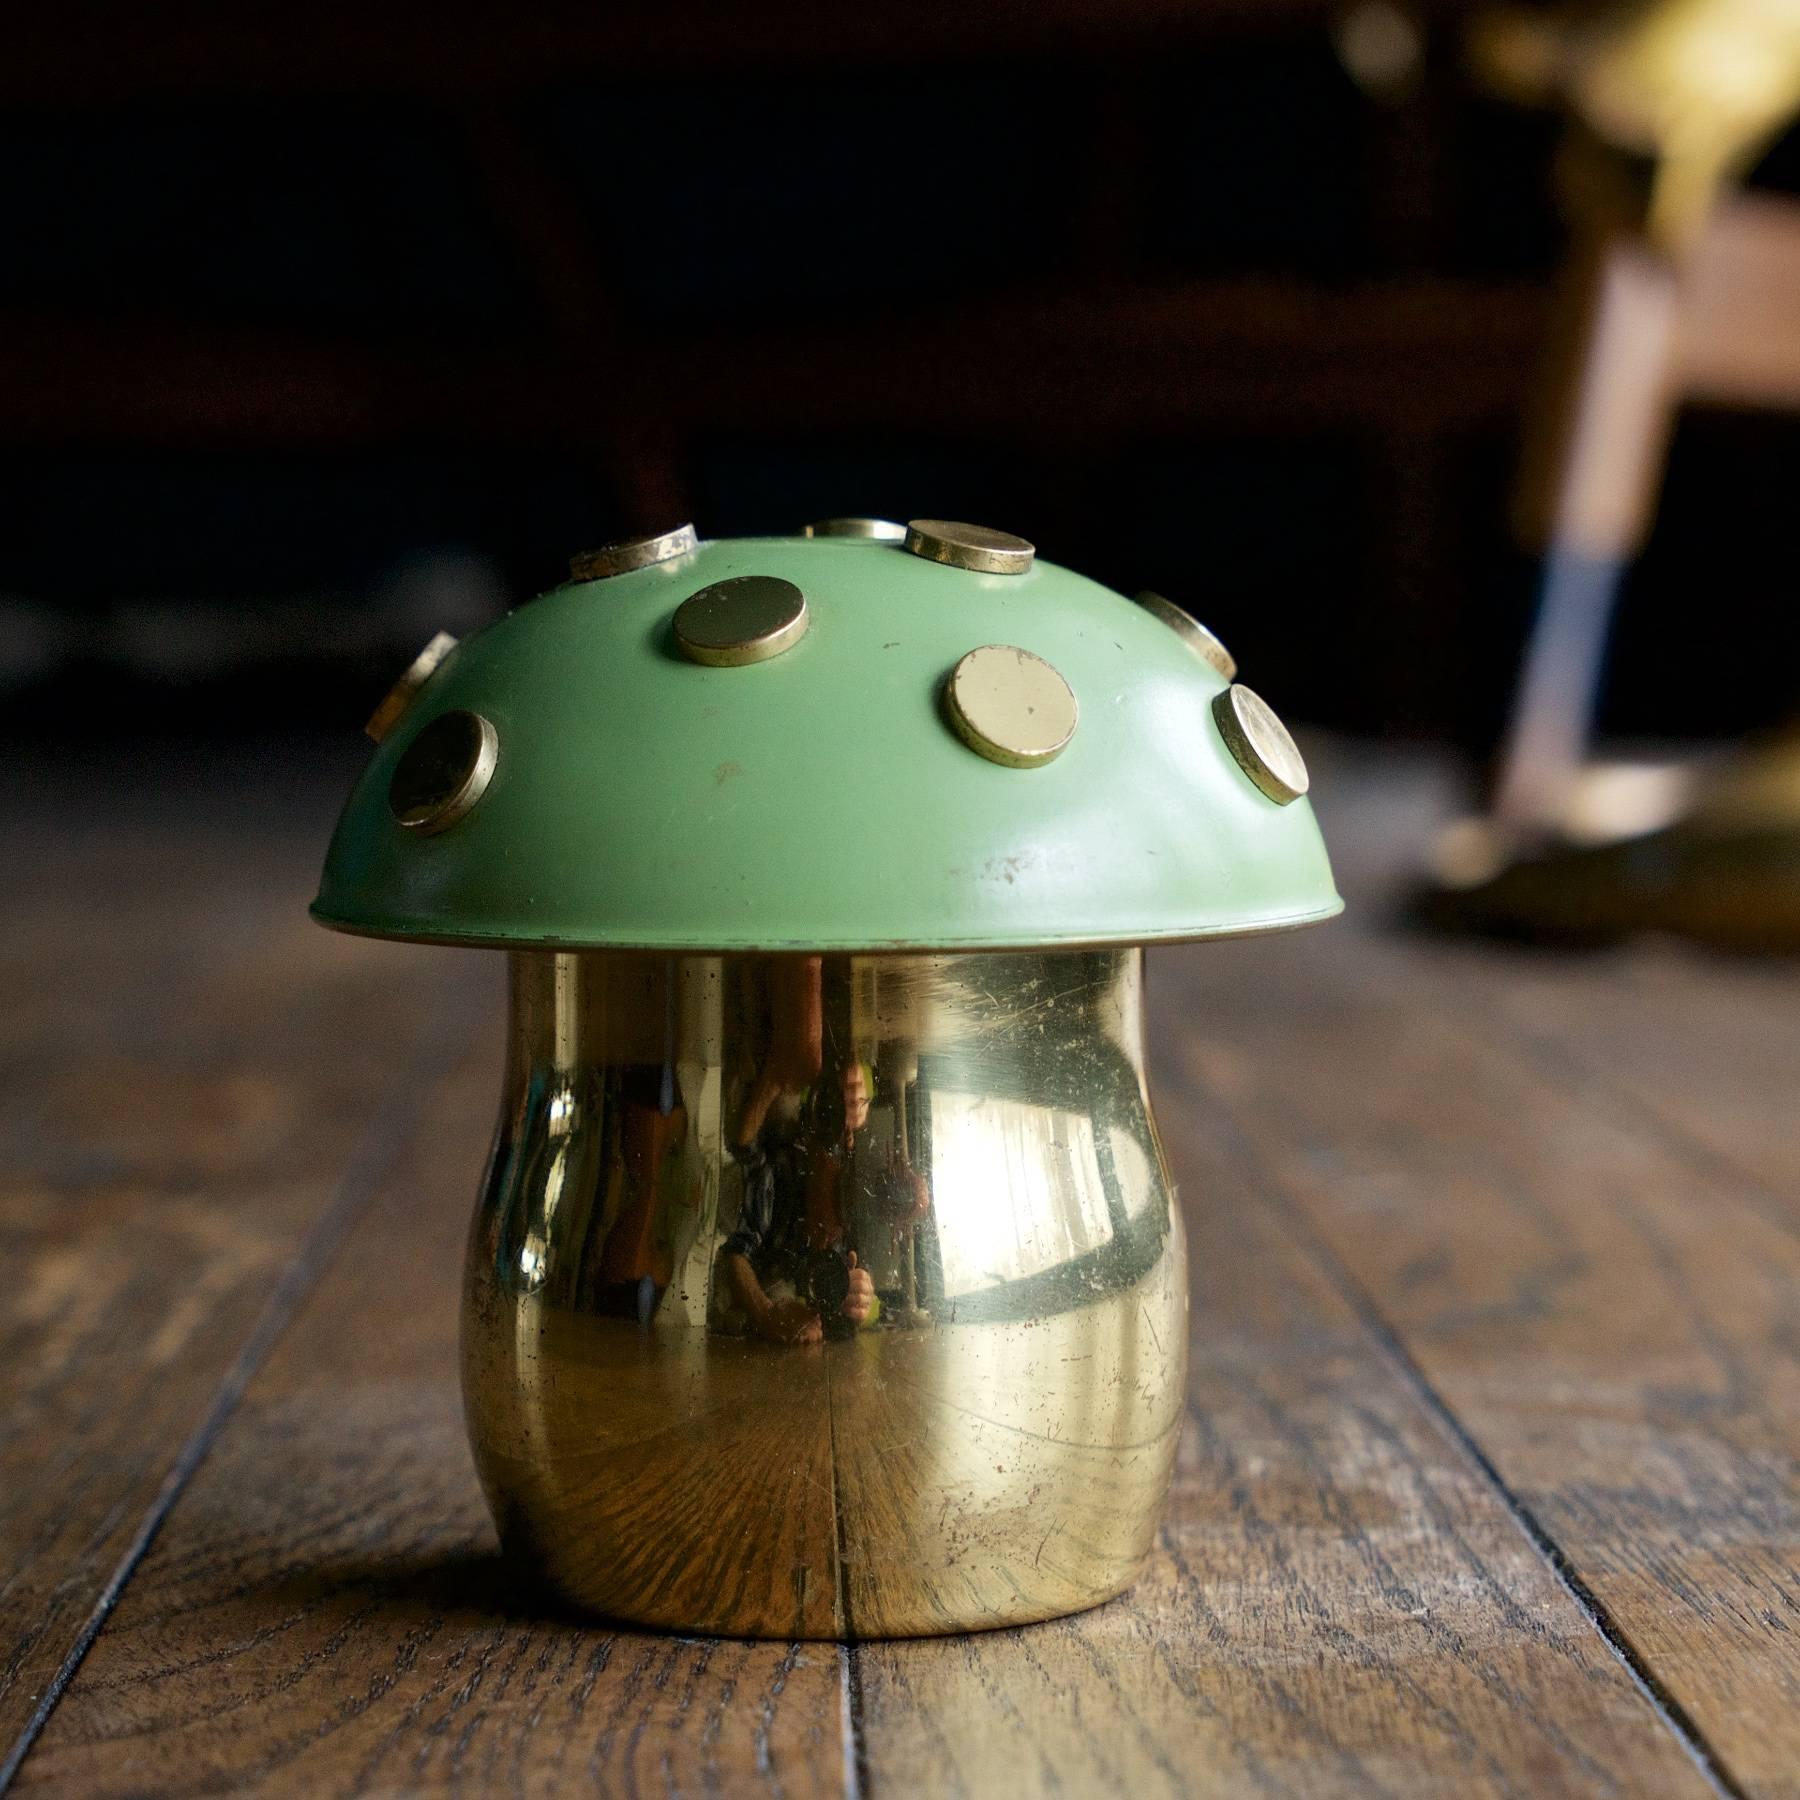 The domed lid of this Mushroom container is enameled in sage green with raised brass polka-dots, the bottom is polished brass. This example is lined in felt, but can be easily removed. Uncommon and playful form.